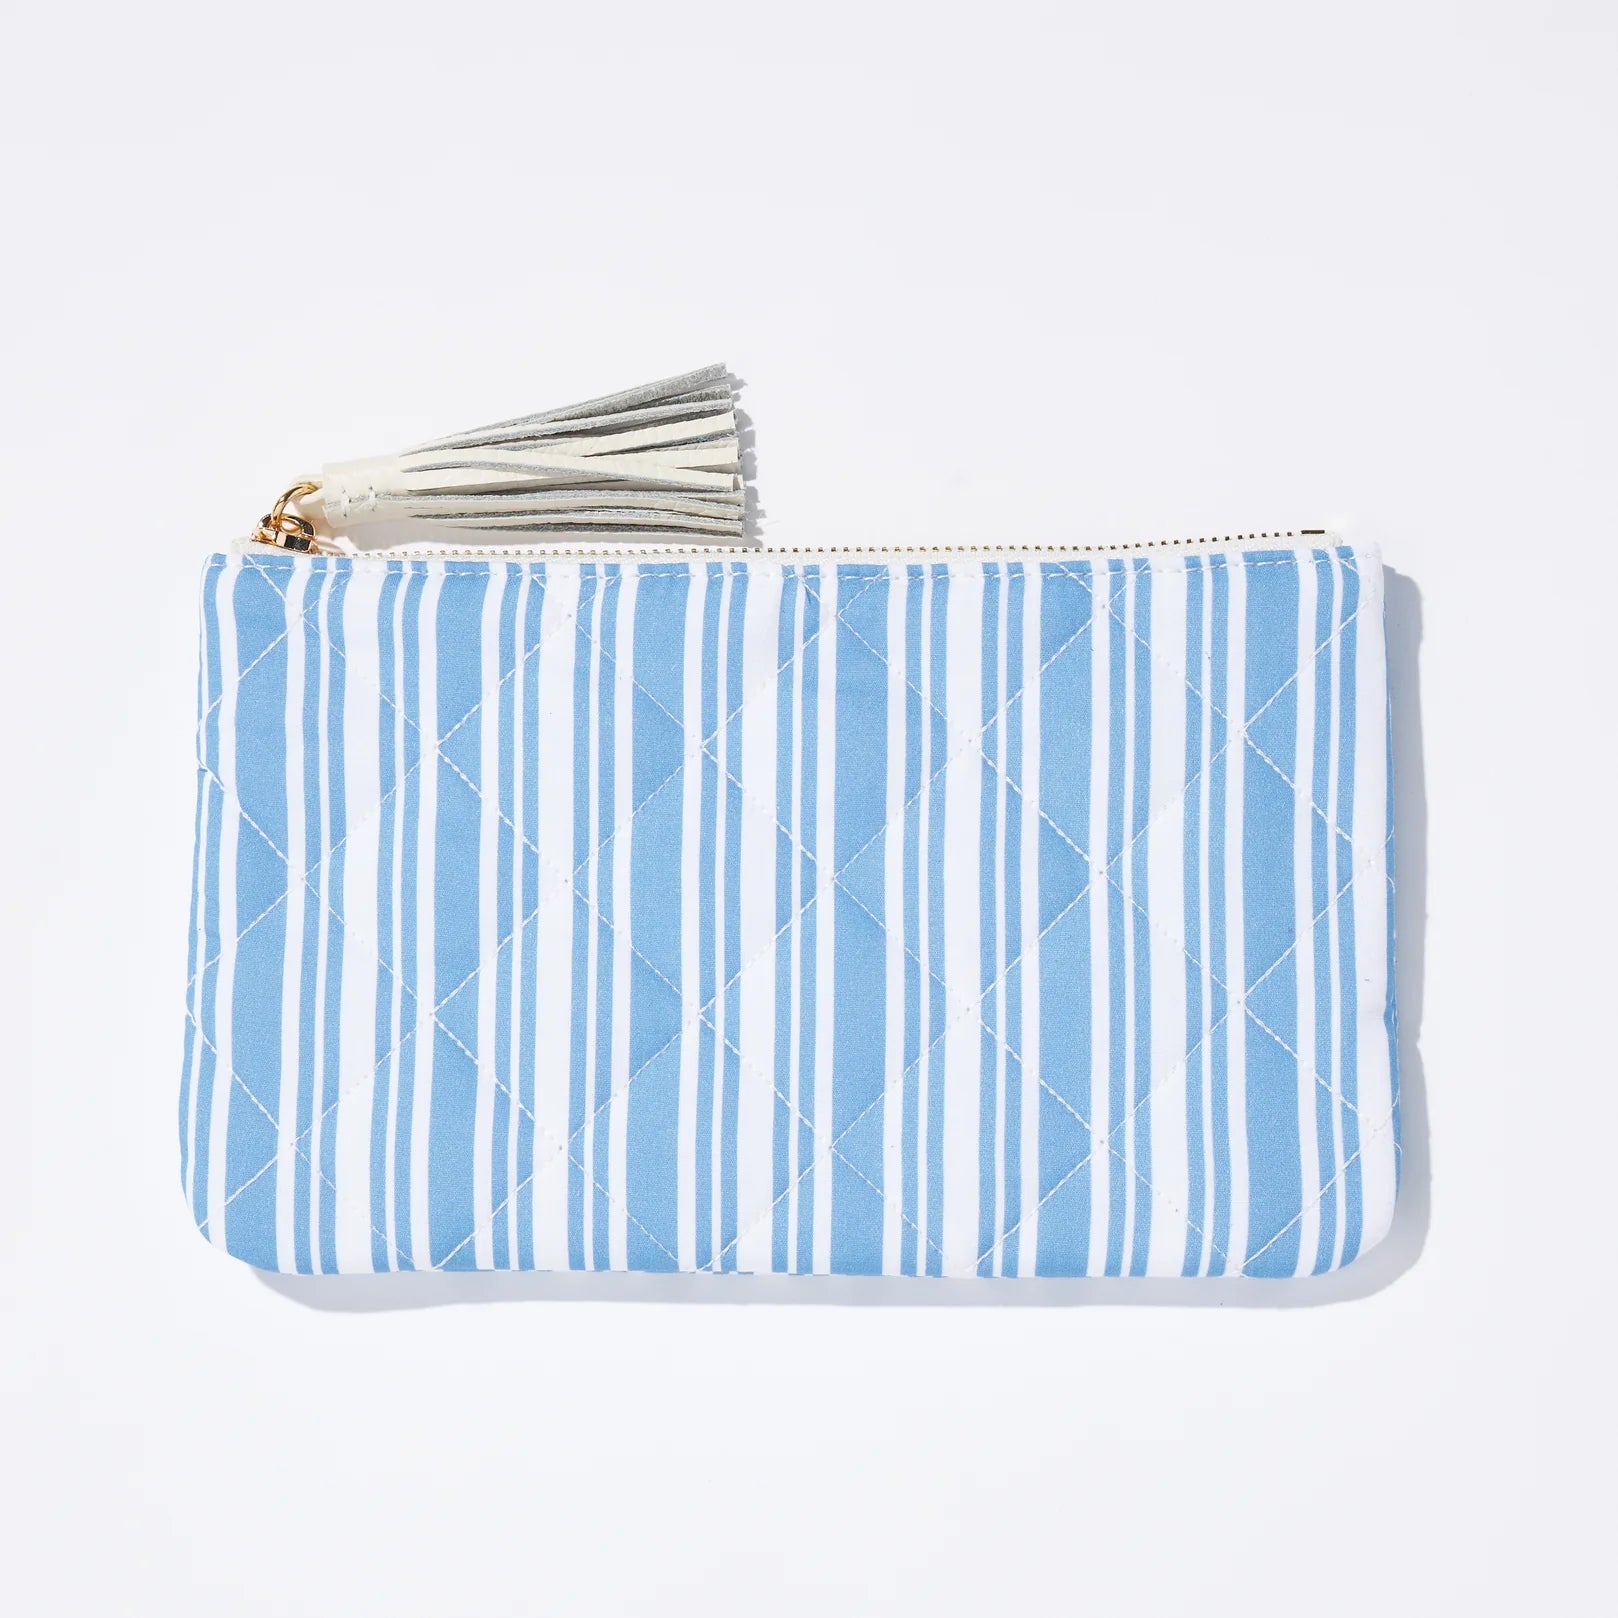 Neely & Chloe Carly Small Flat Pouch